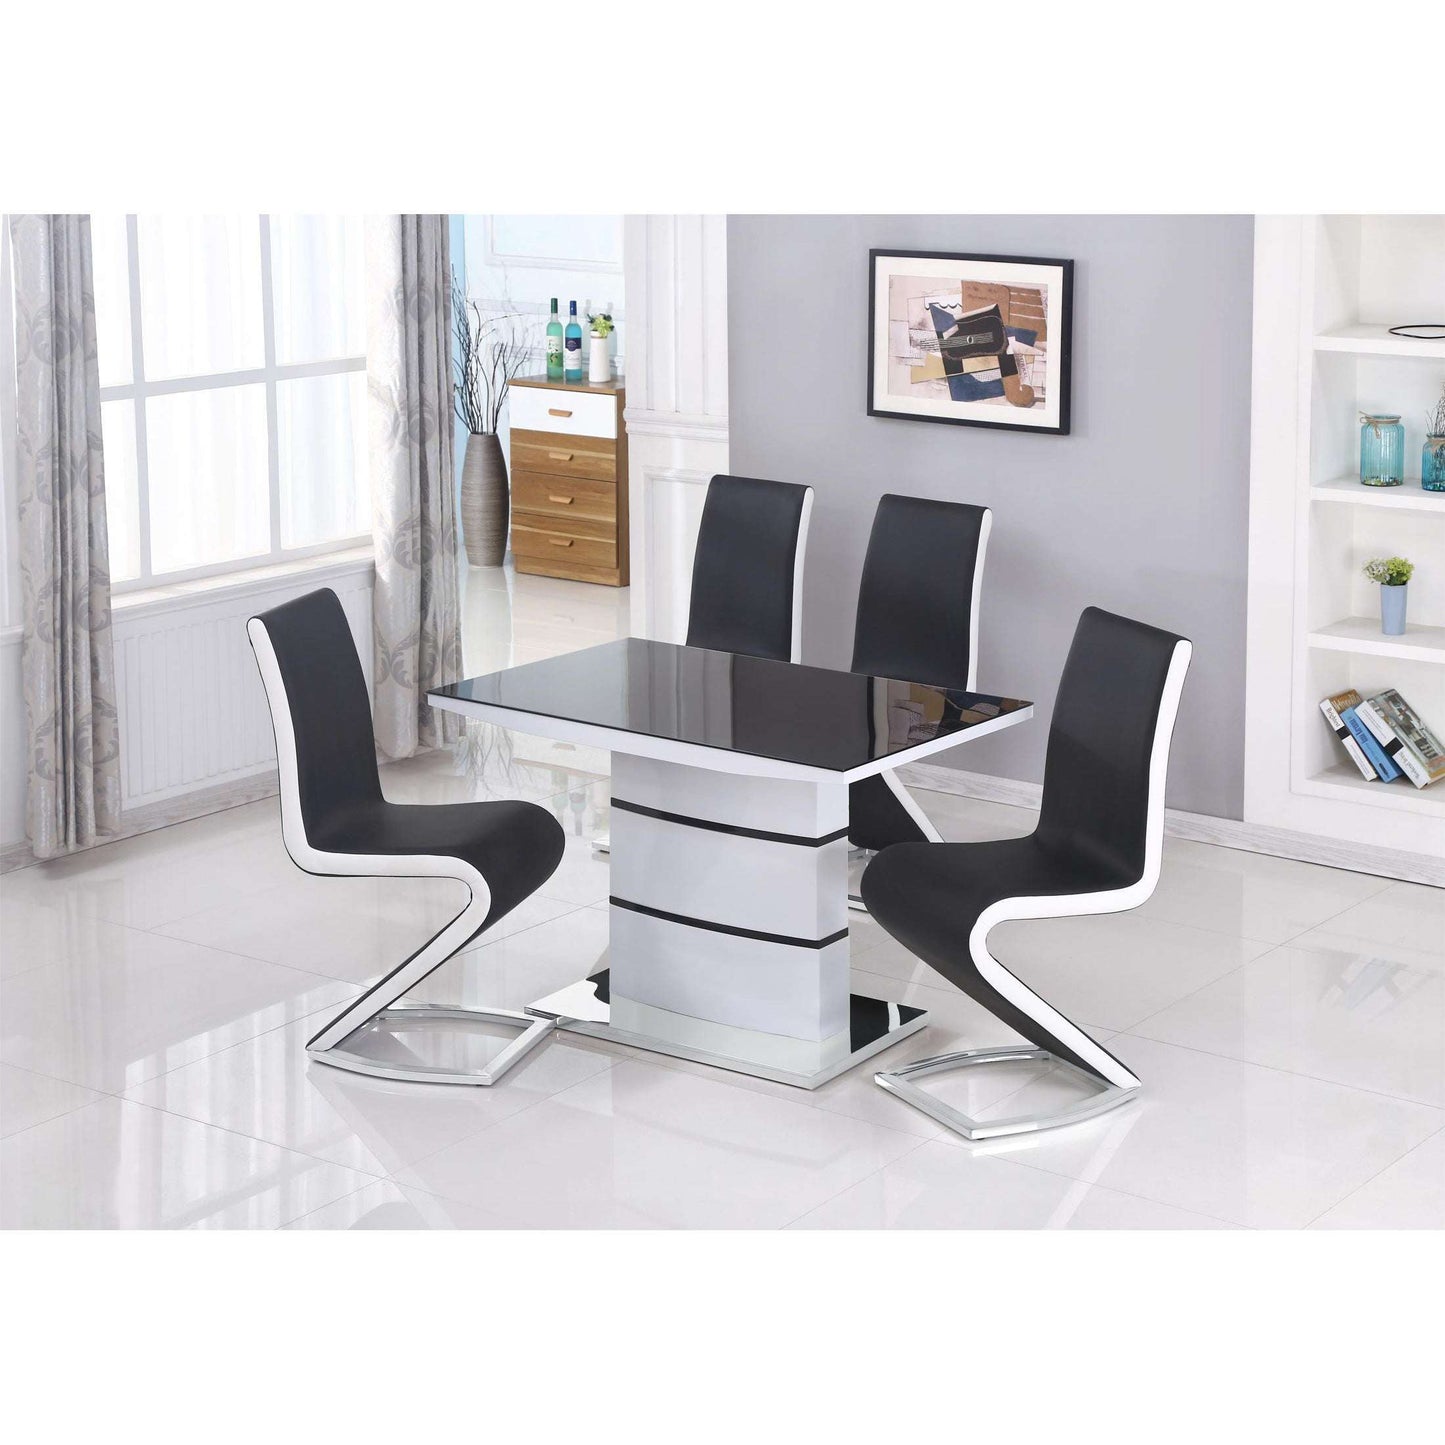 Ashpinoke:Aldridge Small High Gloss Dining Table White with Black Glass Top,Dining Tables,Heartlands Furniture